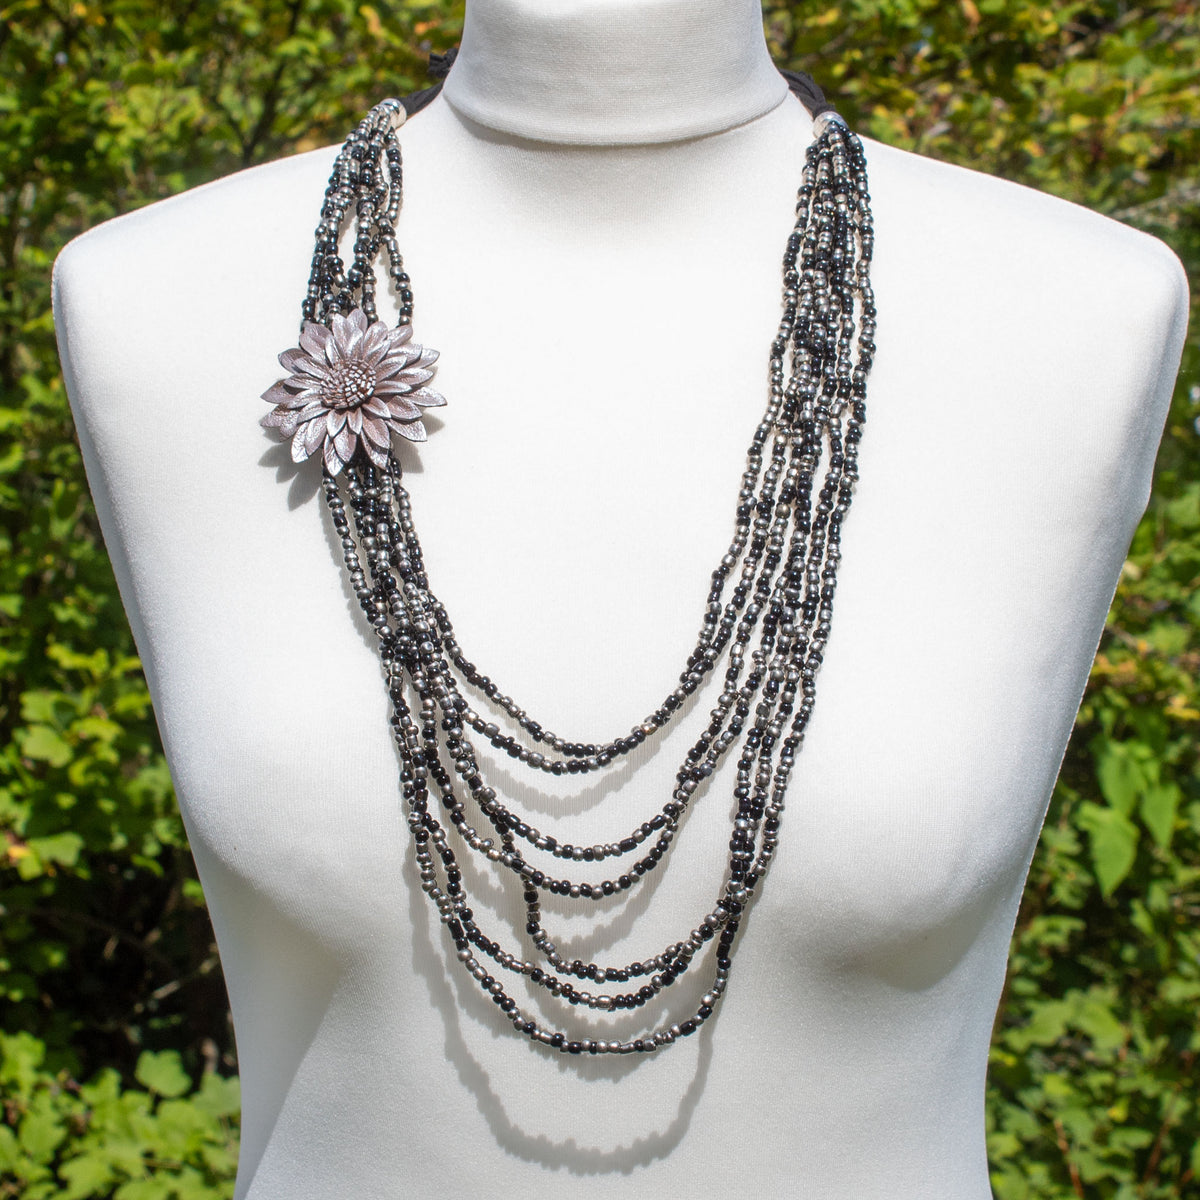 Multi-strand black &amp; silver necklace with silver leather flower | Necklace - The Naughty Shrew